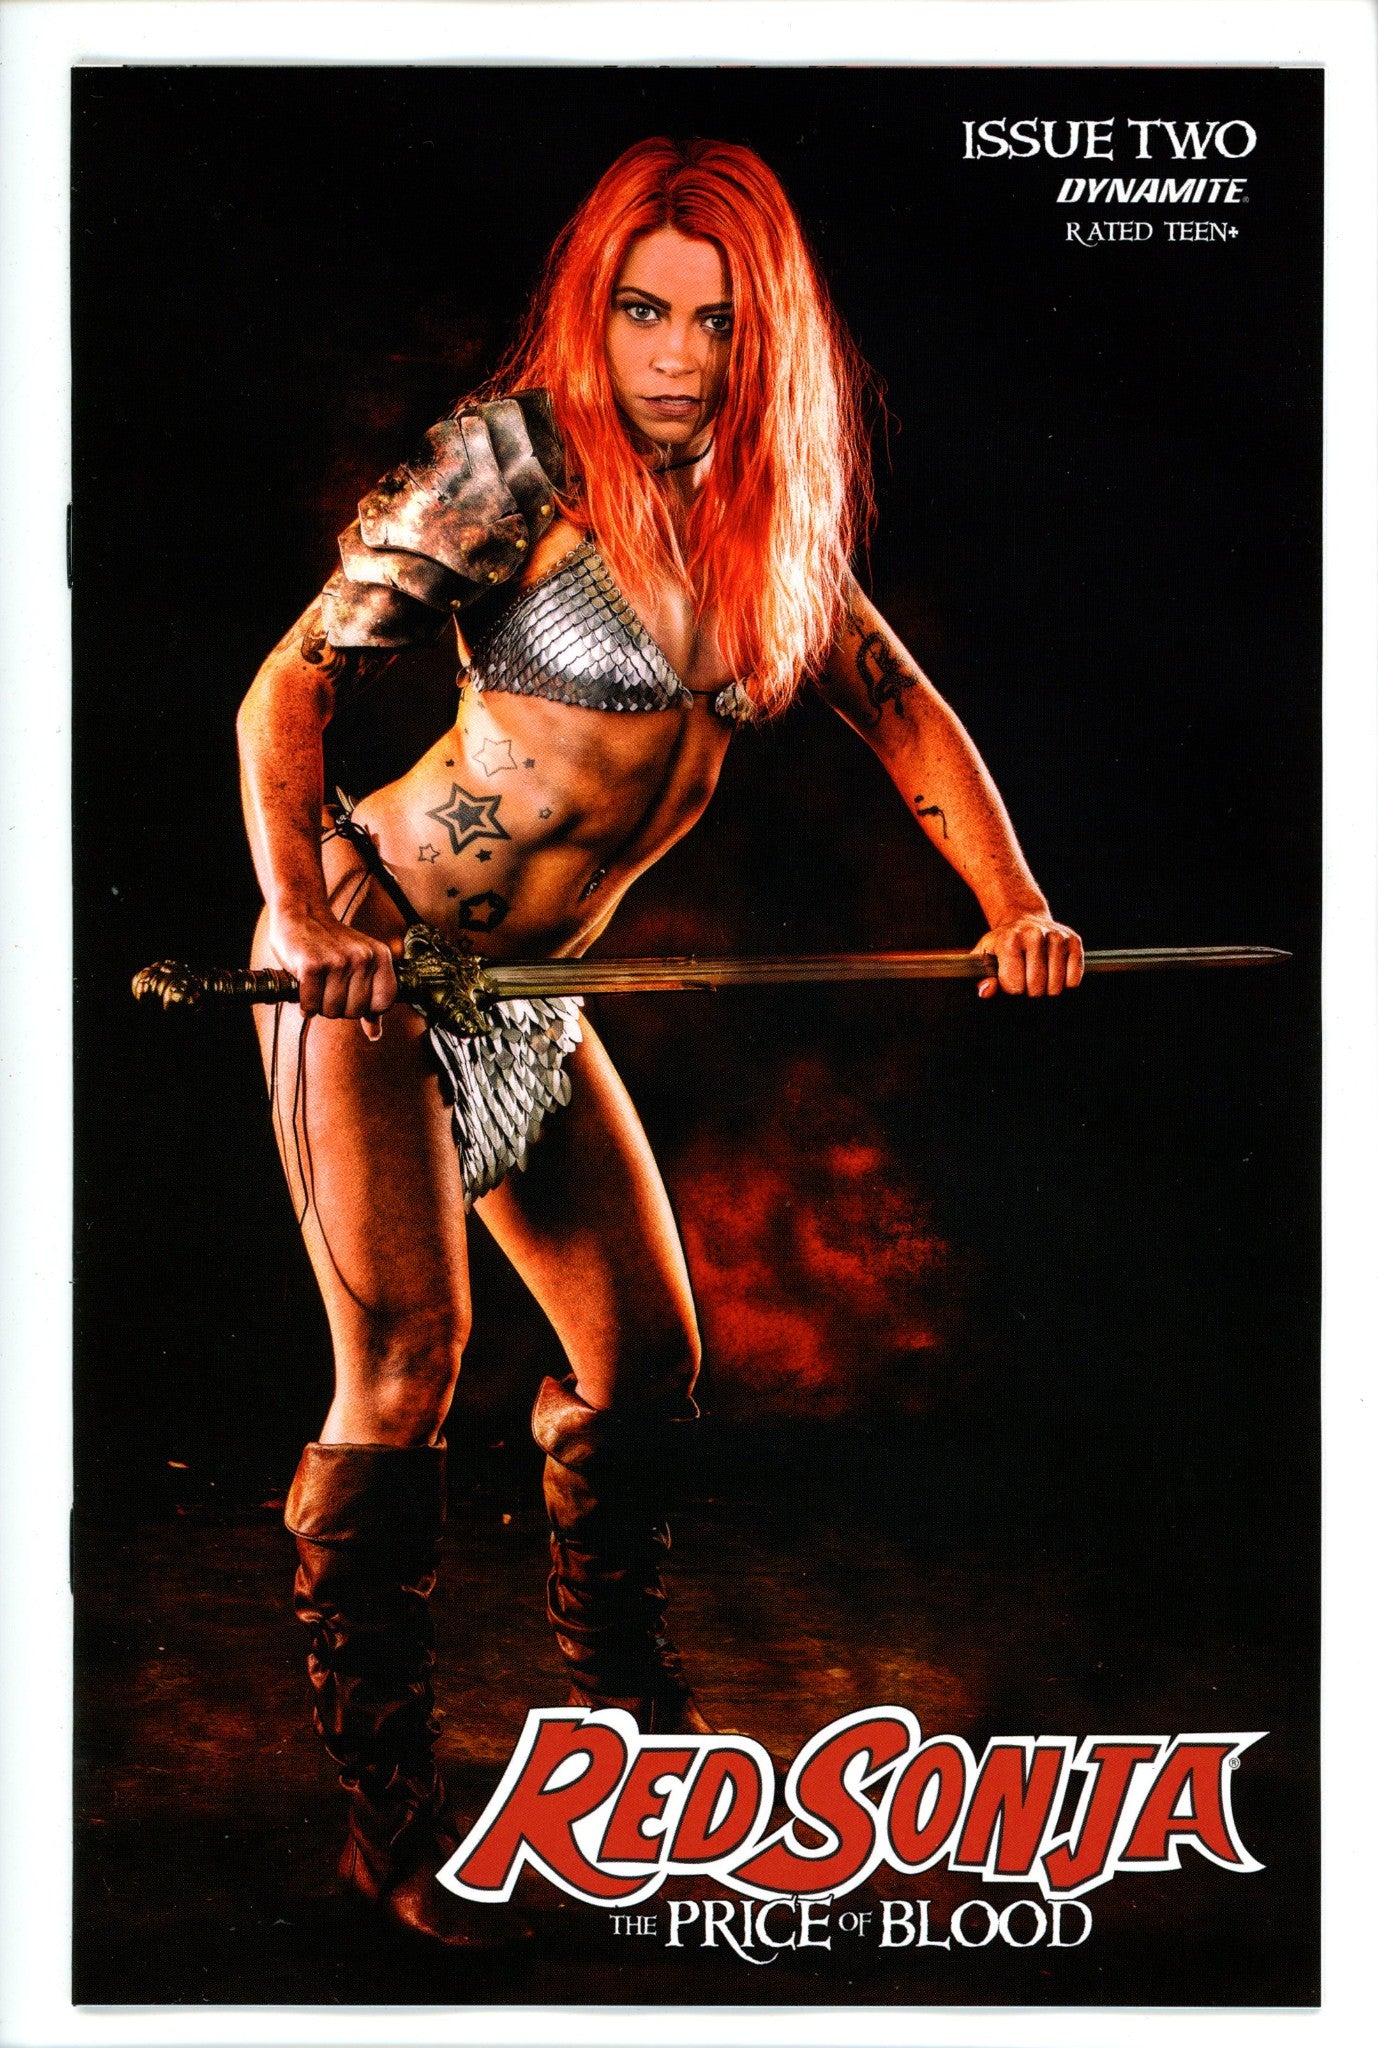 Red Sonja Price of Blood 2 Cosplay Variant-Dynamite-CaptCan Comics Inc